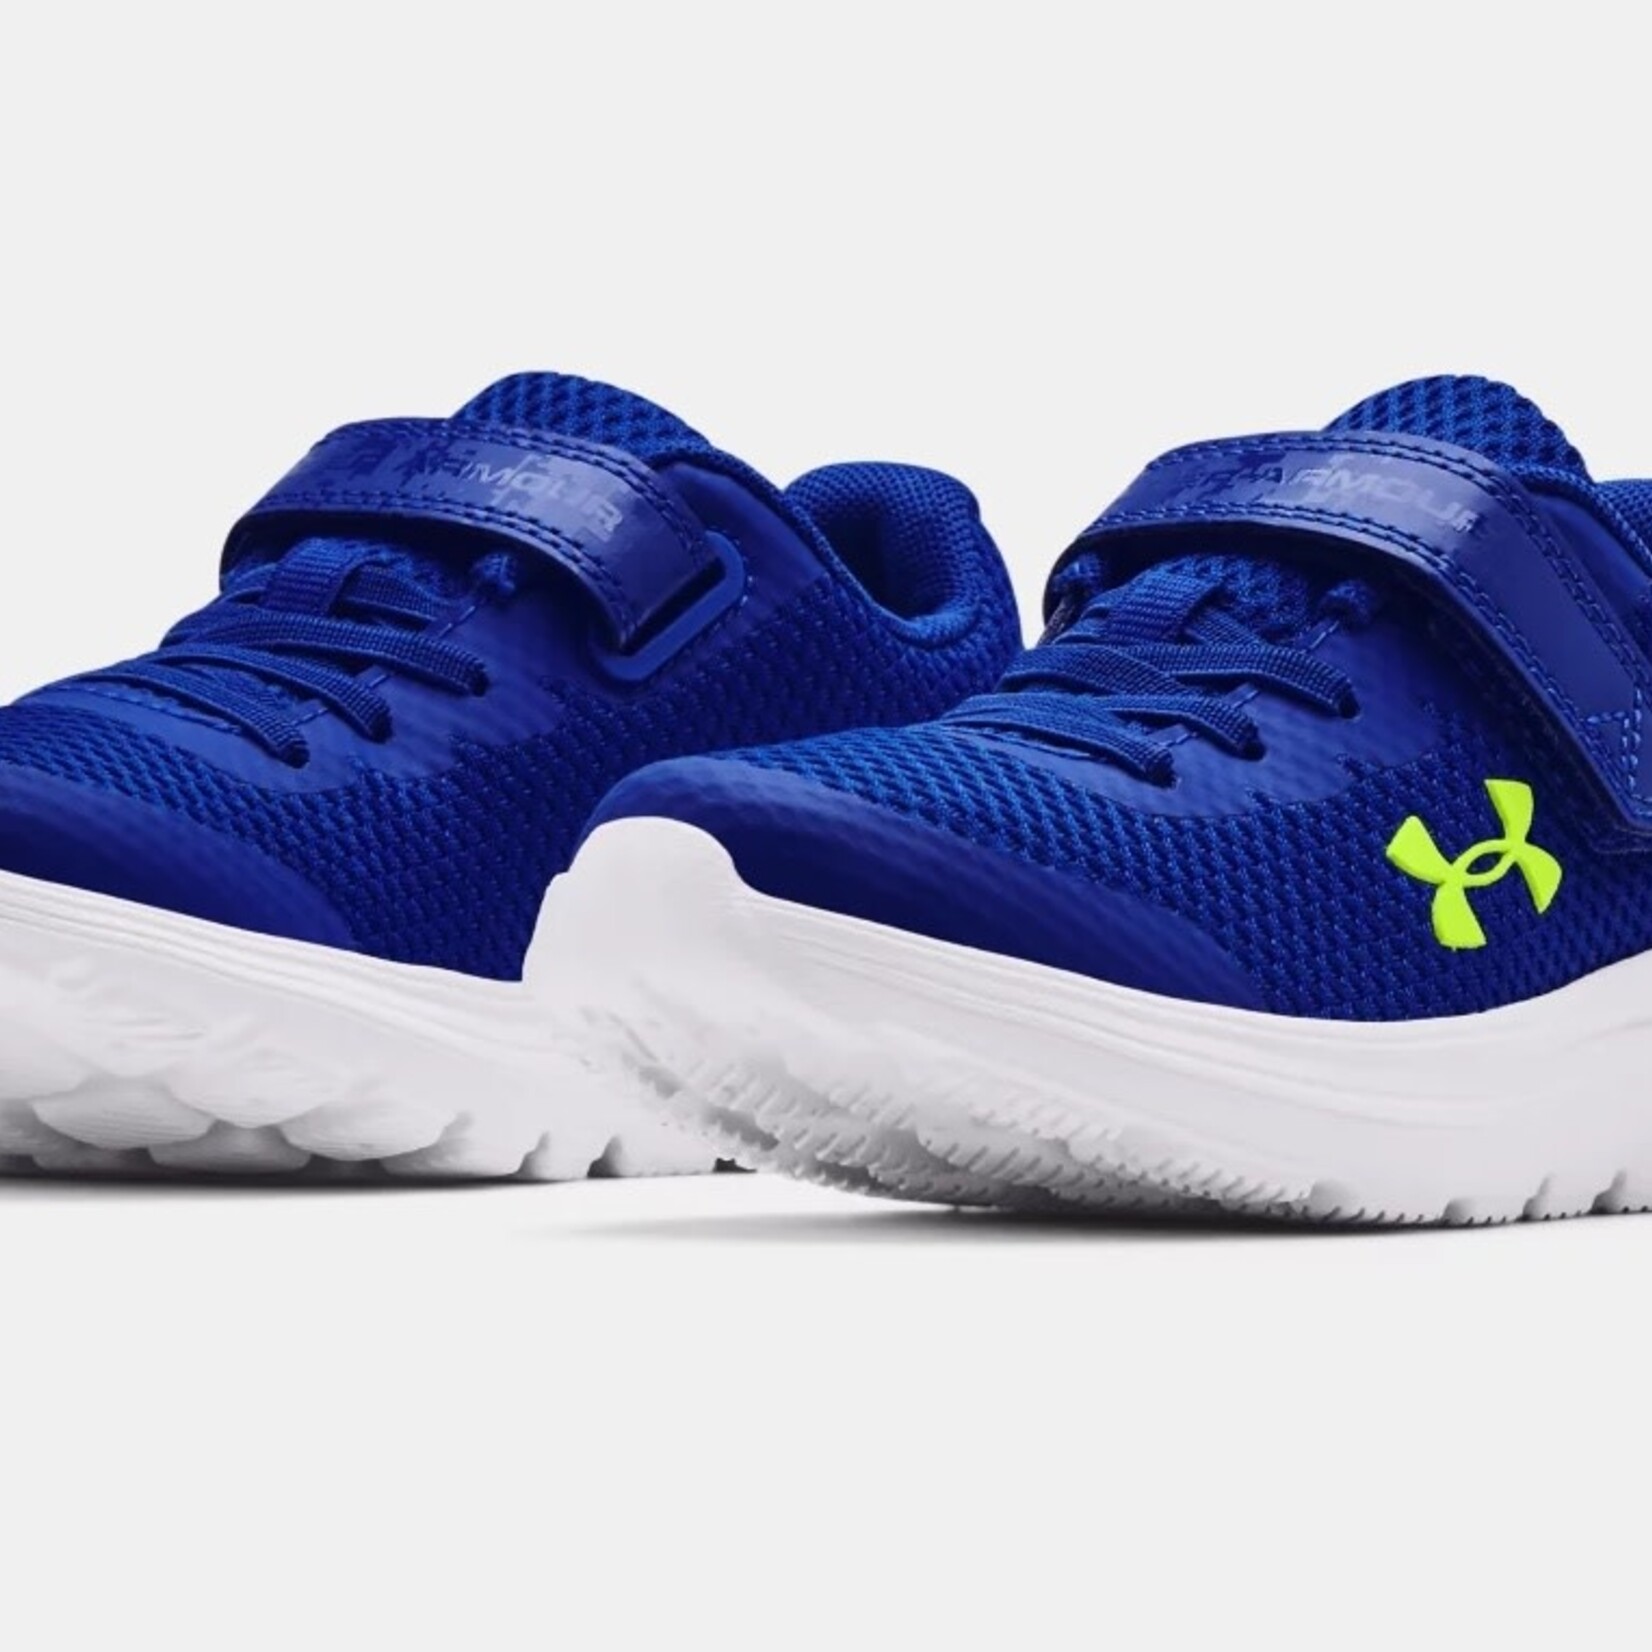 Under Armour Under Armour Running Shoes, Surge 2 AC, Boys